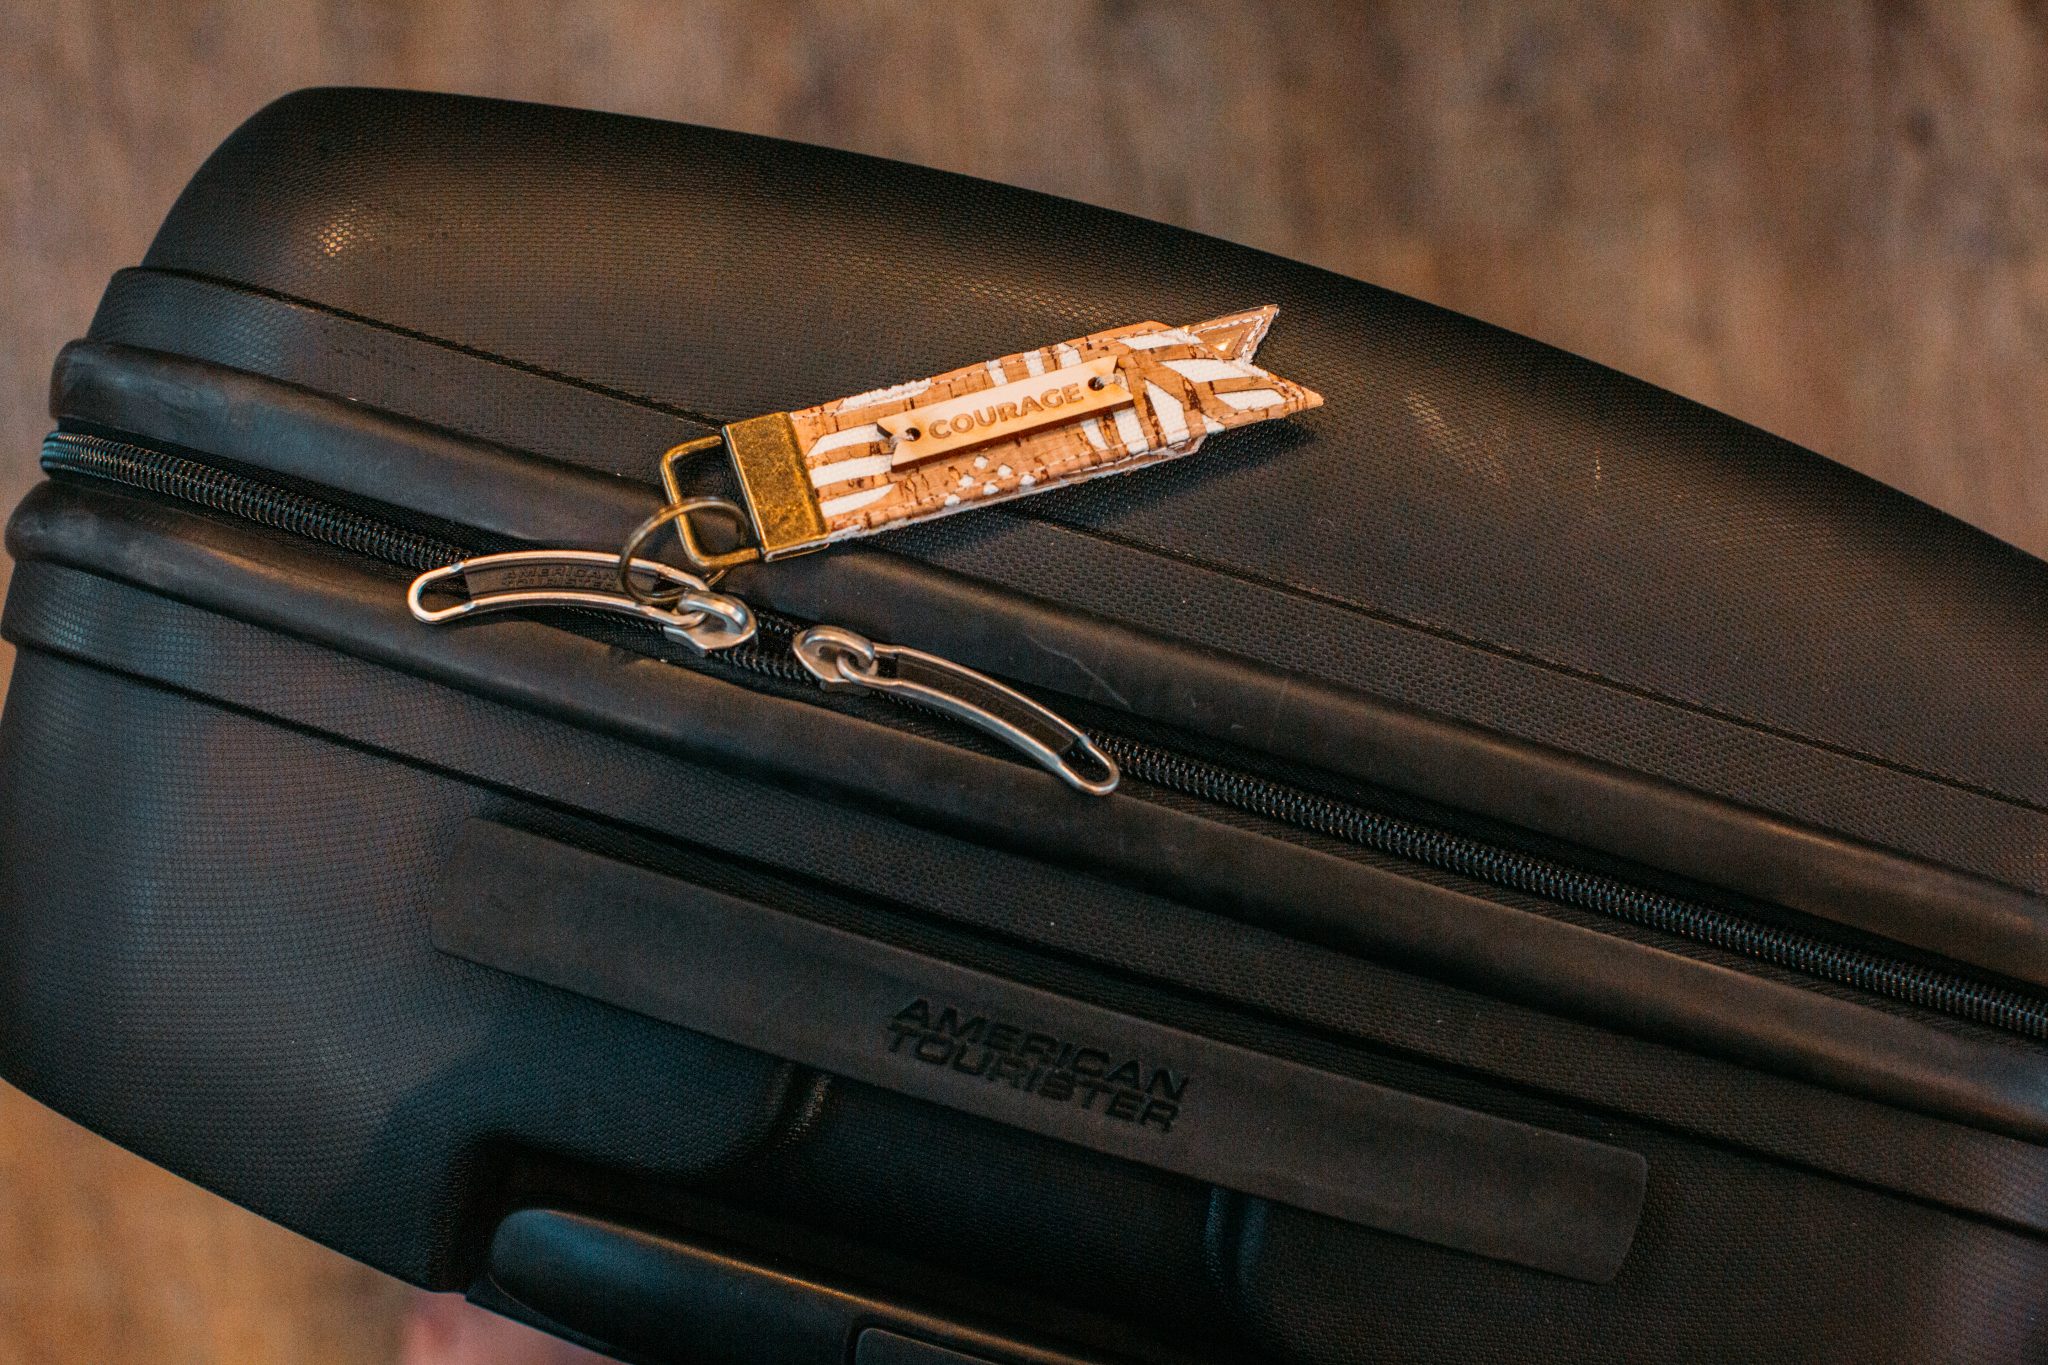 Review of the EXPLORER Keychain Luggage Tag